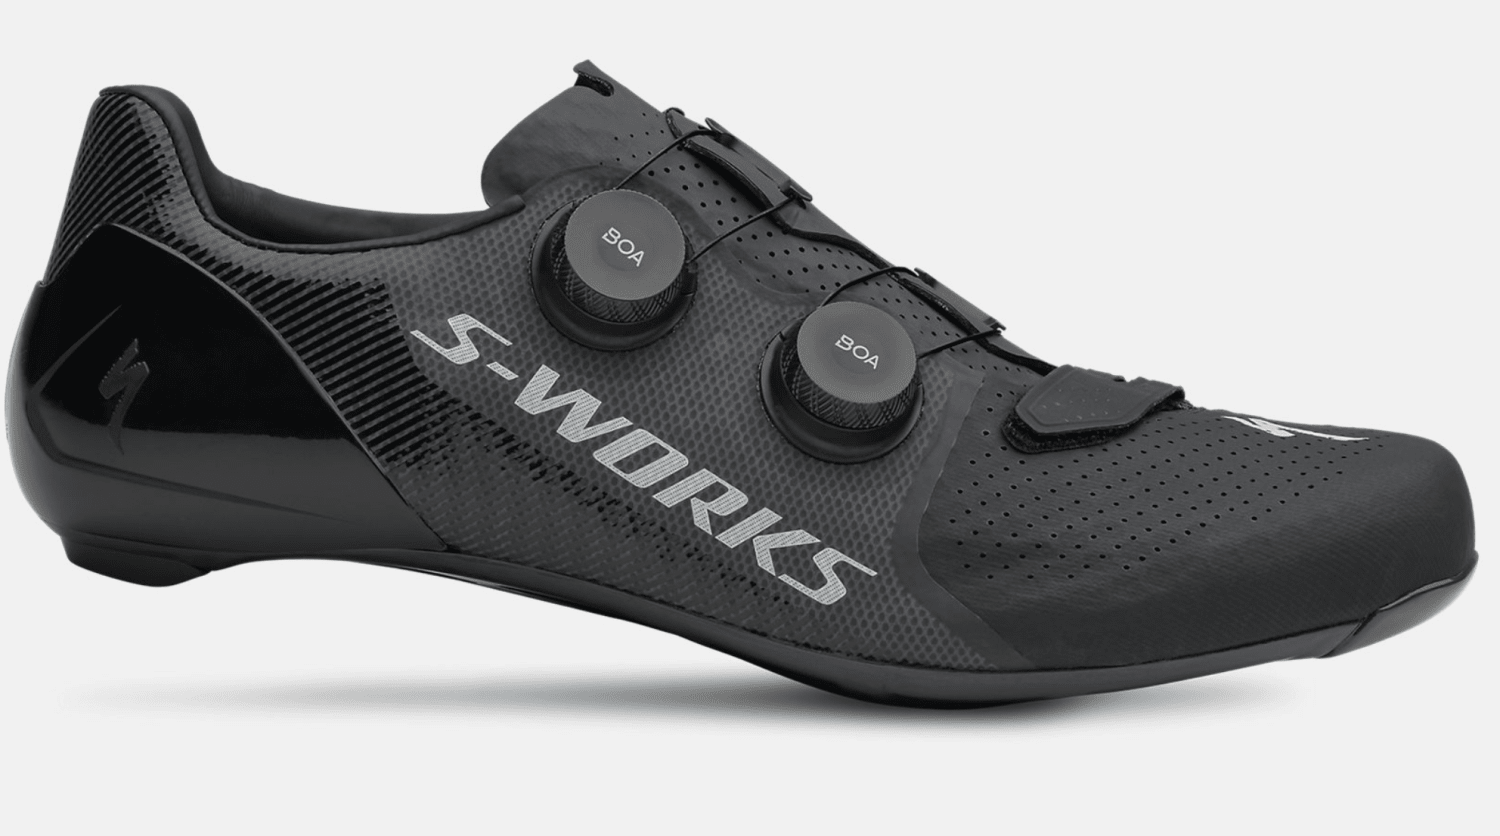 Details about   Men Outdoor Road Bike Cycling Shoes Indoor Spinning Riding Shoes SPD-SL Cleats 